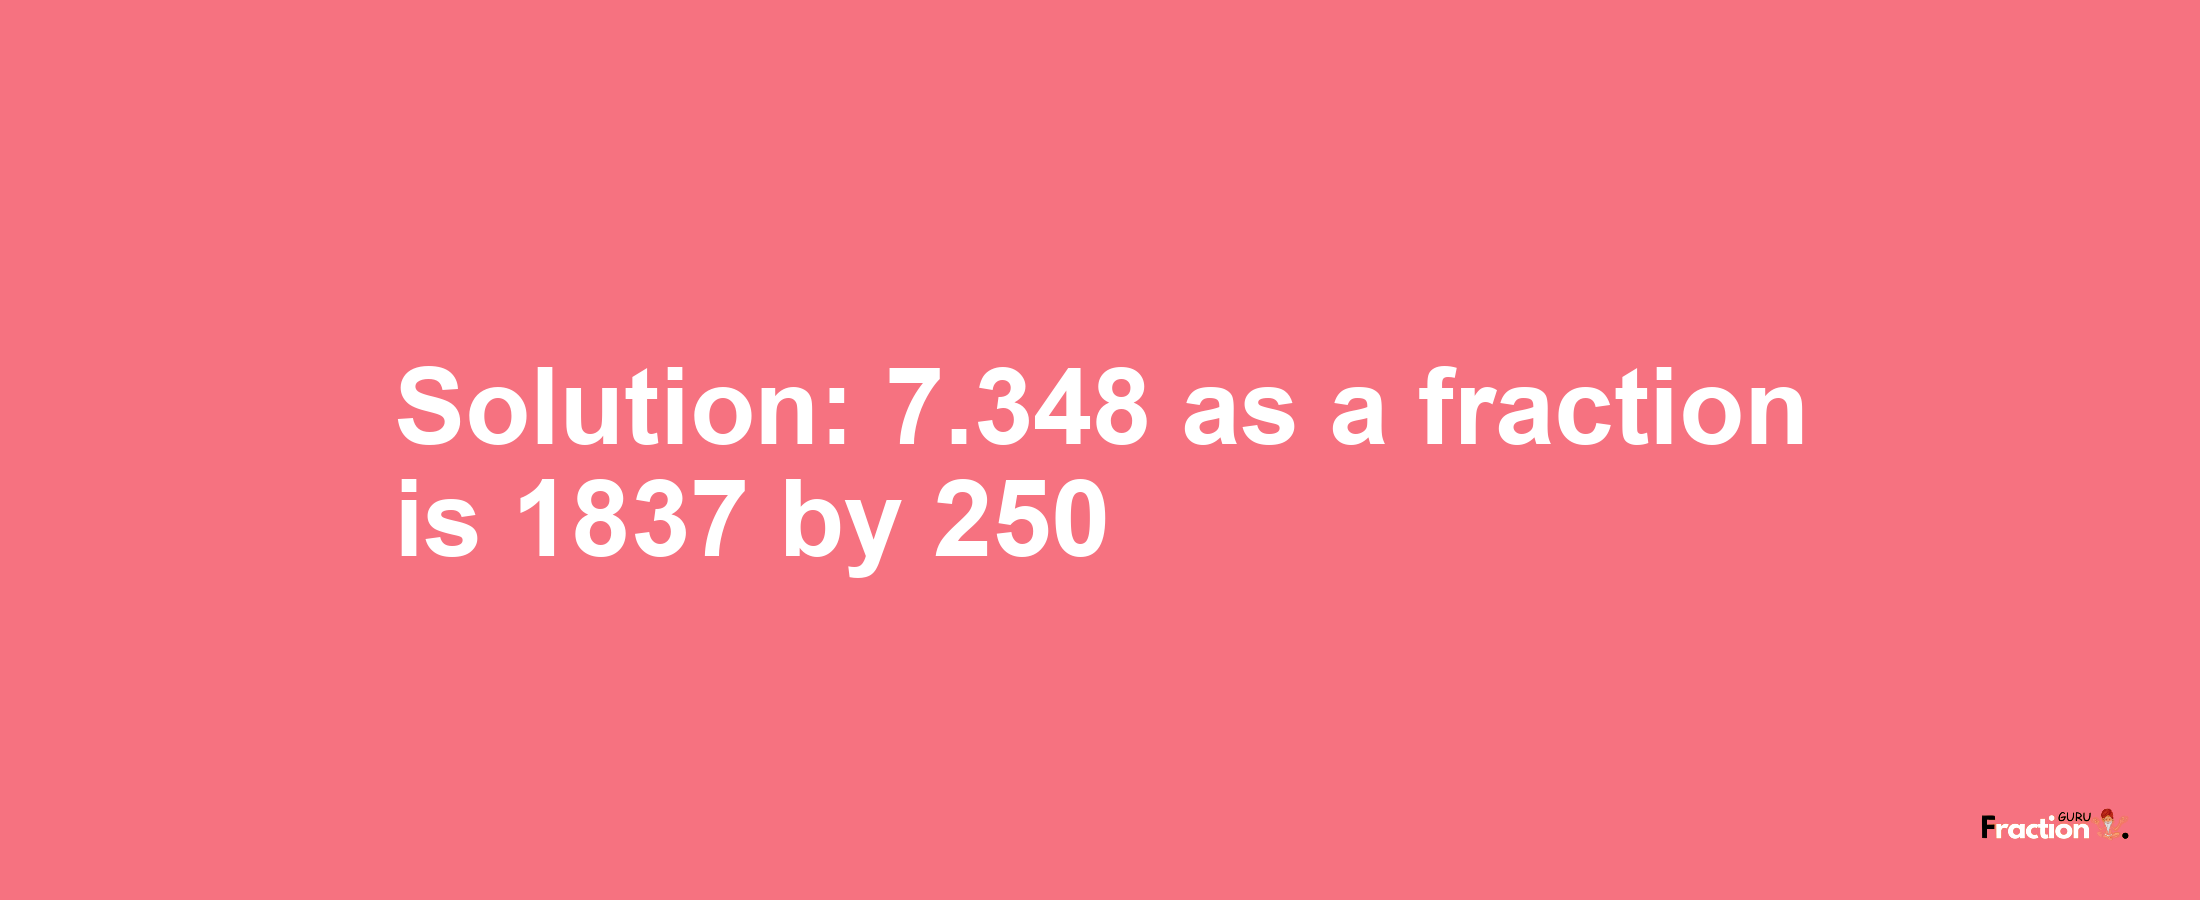 Solution:7.348 as a fraction is 1837/250